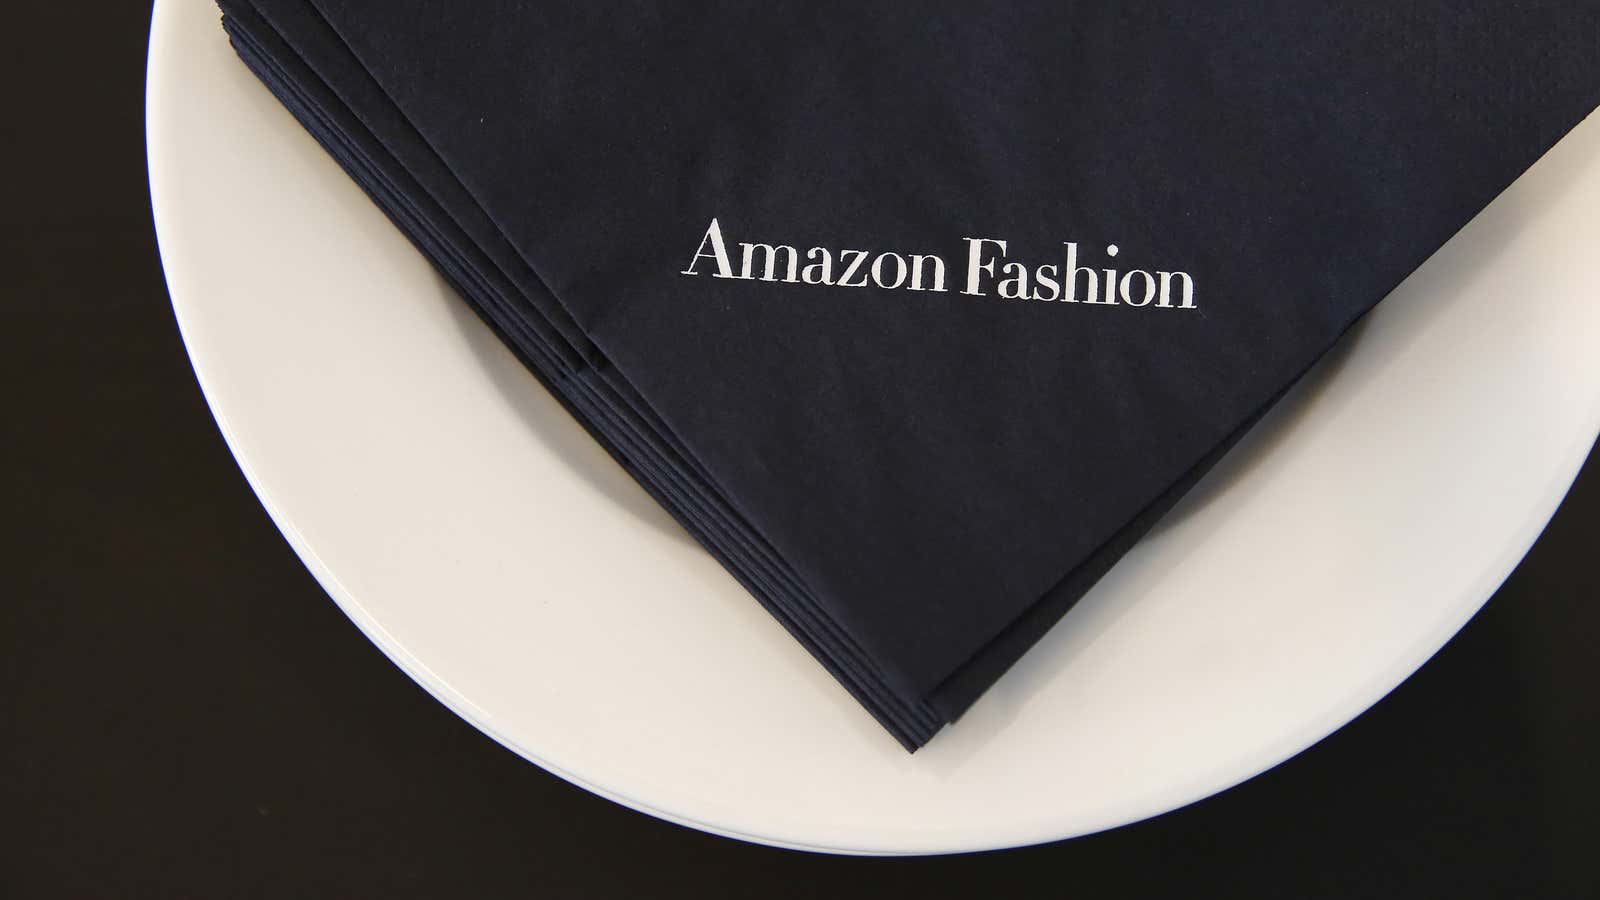 Amazon wants to be a one-stop shop for all your fashion needs.